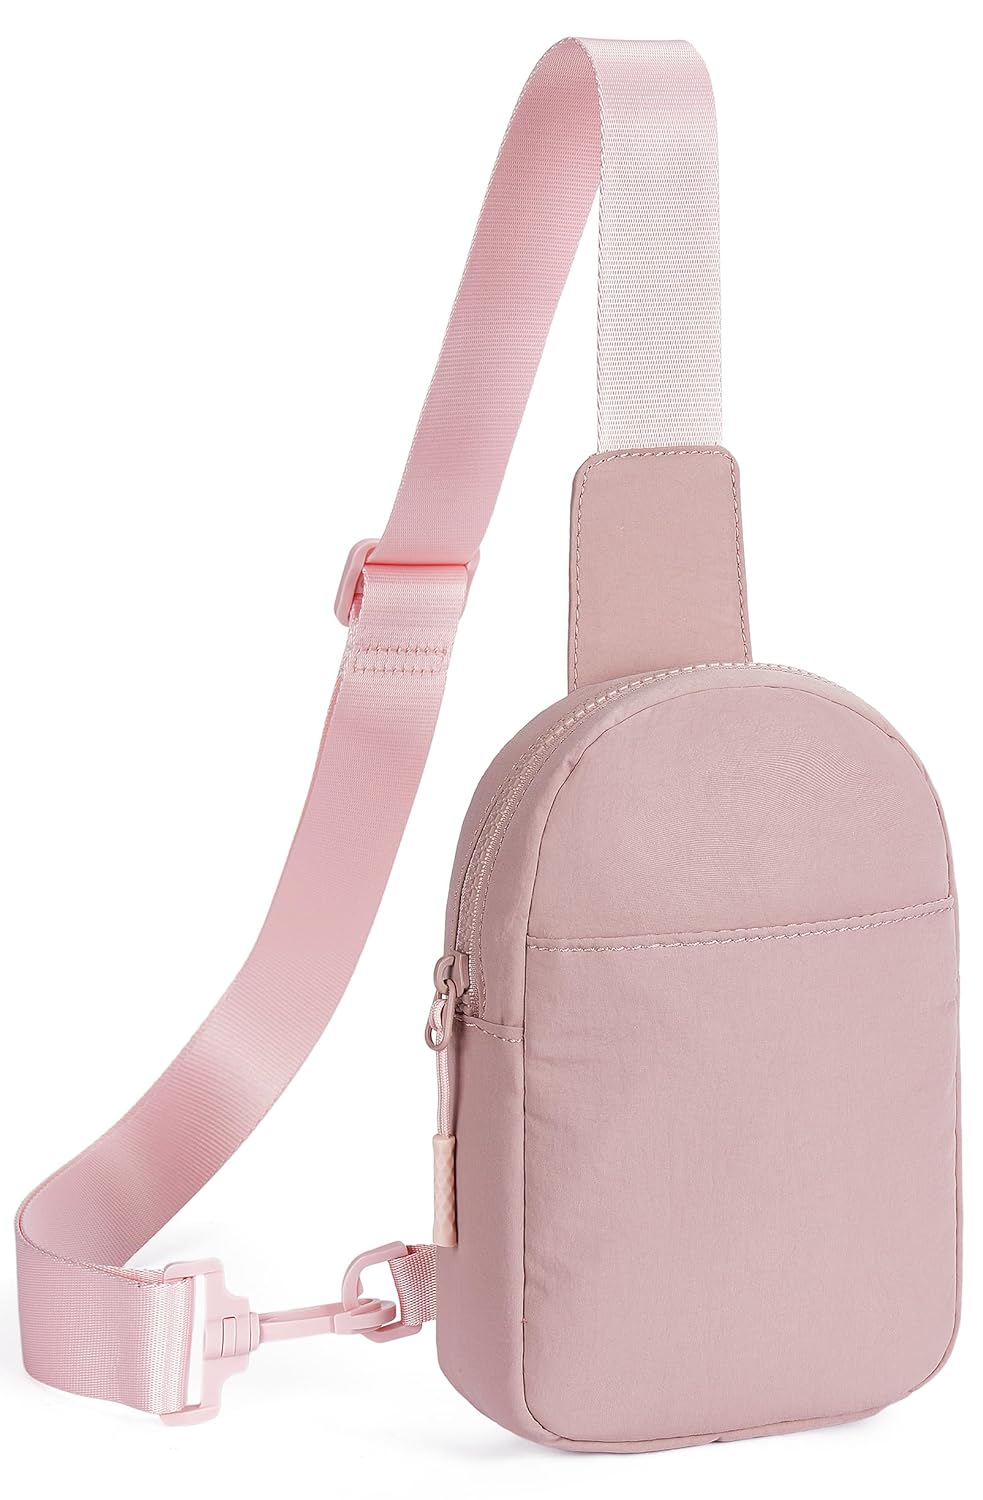 Telena Sling Bag Crossbody Purse Fanny Pack for women Small Chest Bag Lightweight with Adjustable Strap, 0-pink, One Size, Stylish